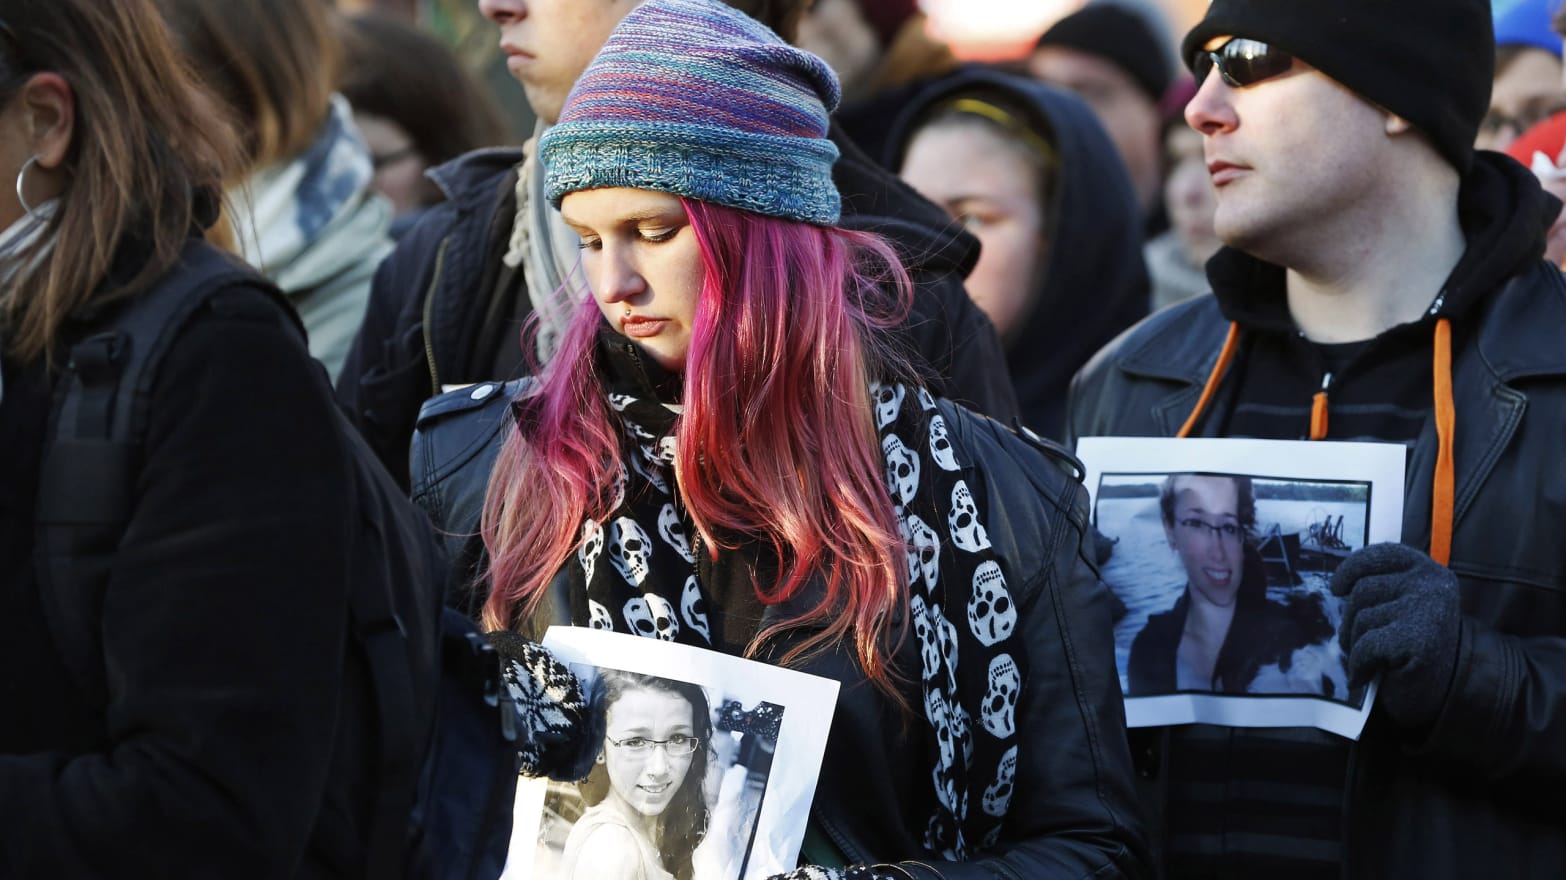 Rehtaeh Parsons's Best Friend Speaks Out